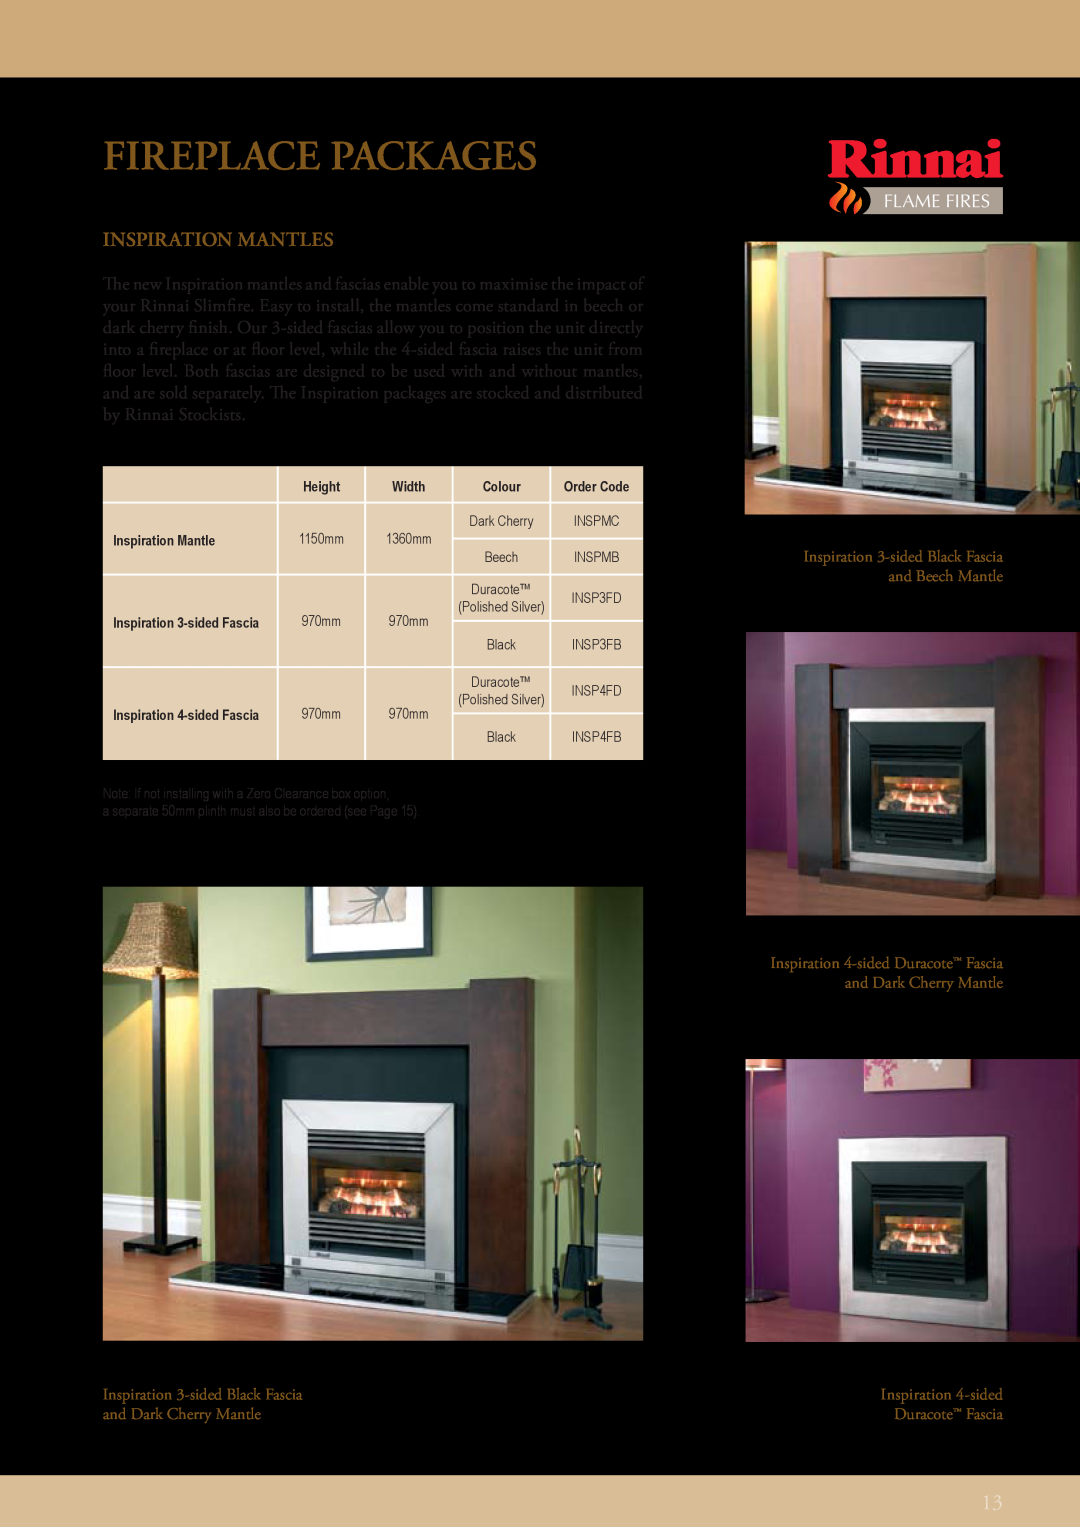 Rinnai FLAME FIRES manual Fireplace Packages, Inspiration MANTLES, Flame Fires 